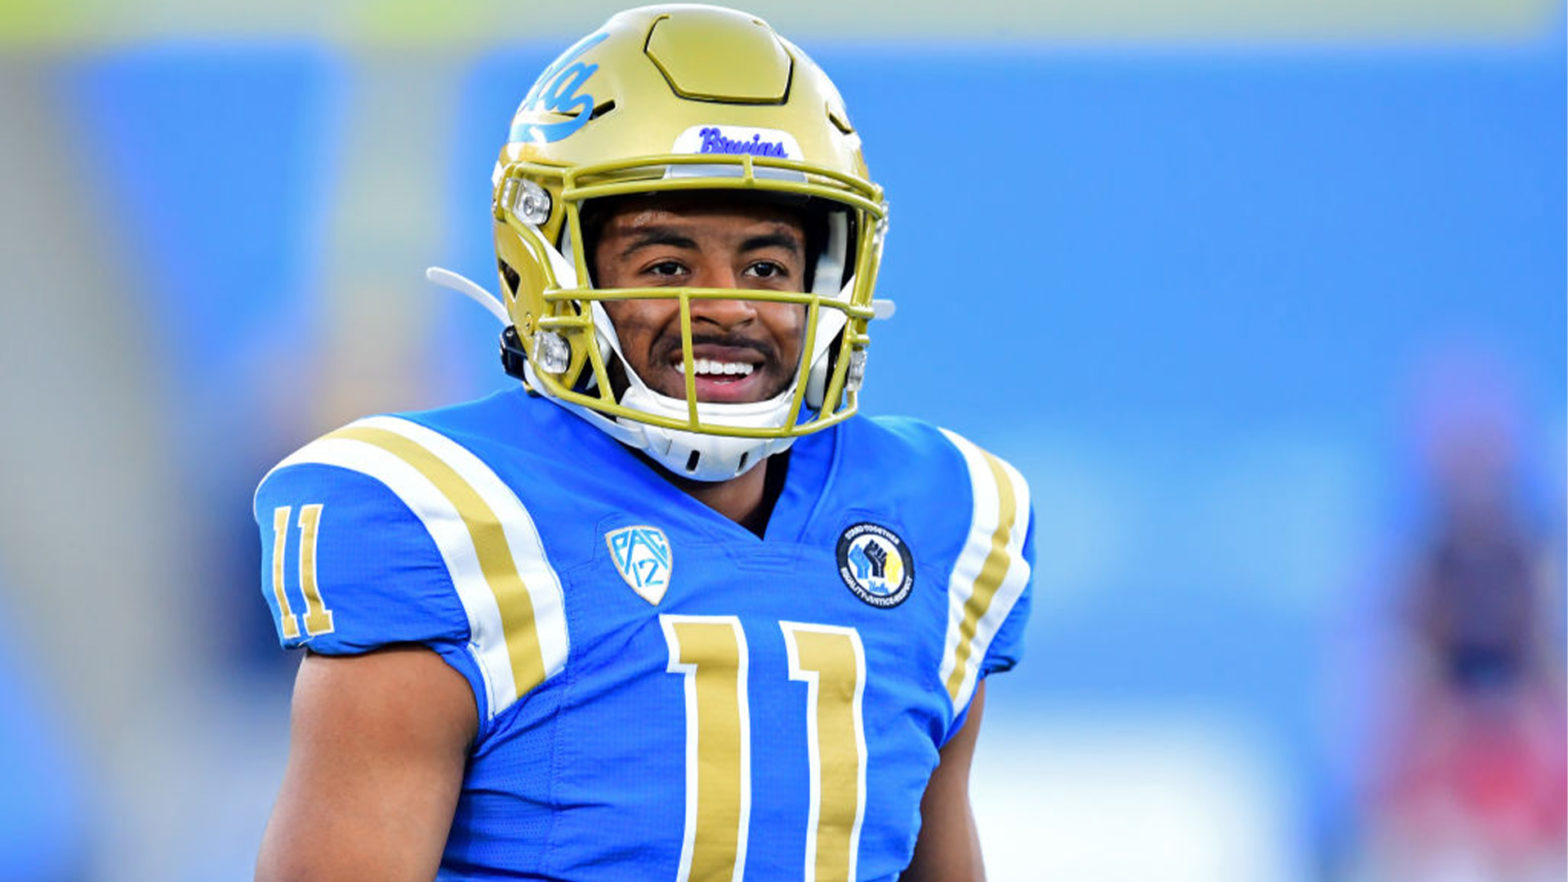 UCLA Football Star Chase Griffin Donates Money From His NIL Deals To Community Organizations